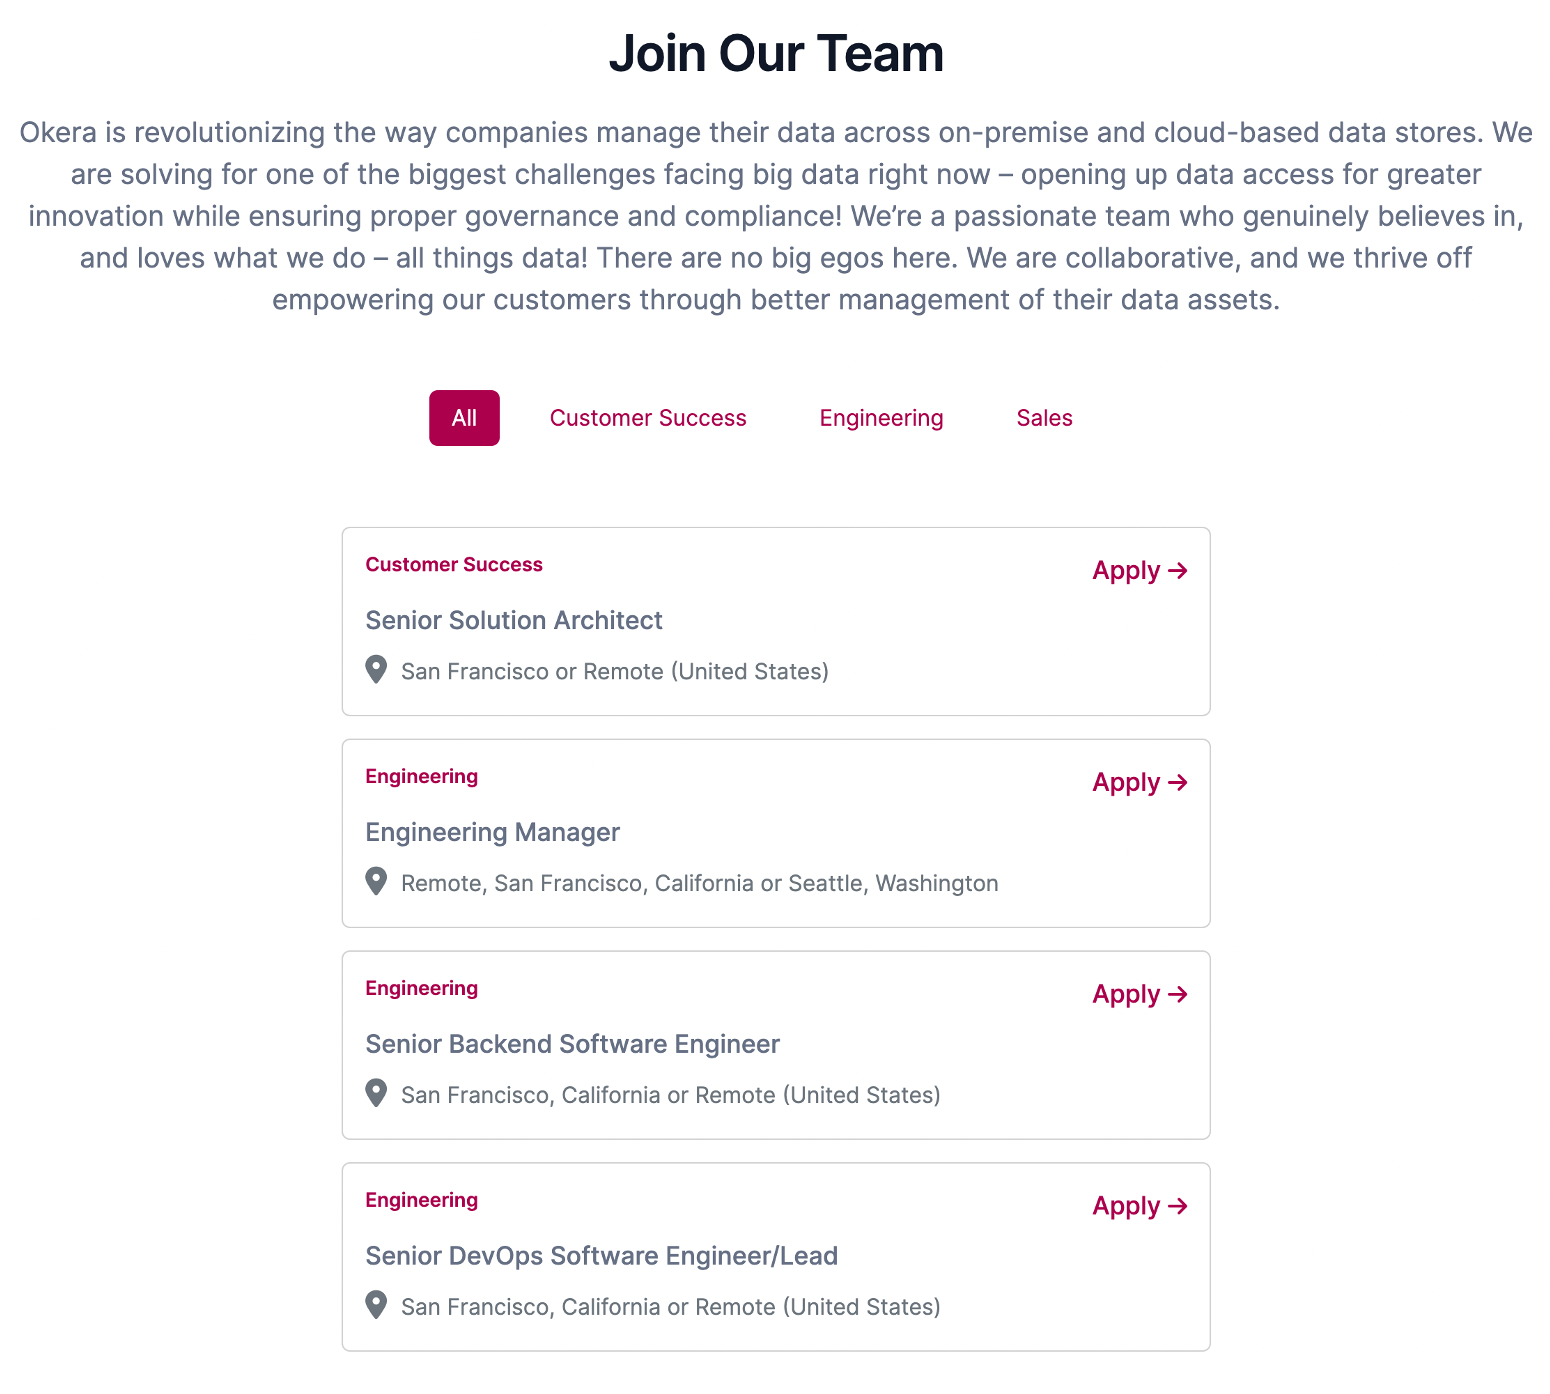 Okera join our team page showing list of open positions